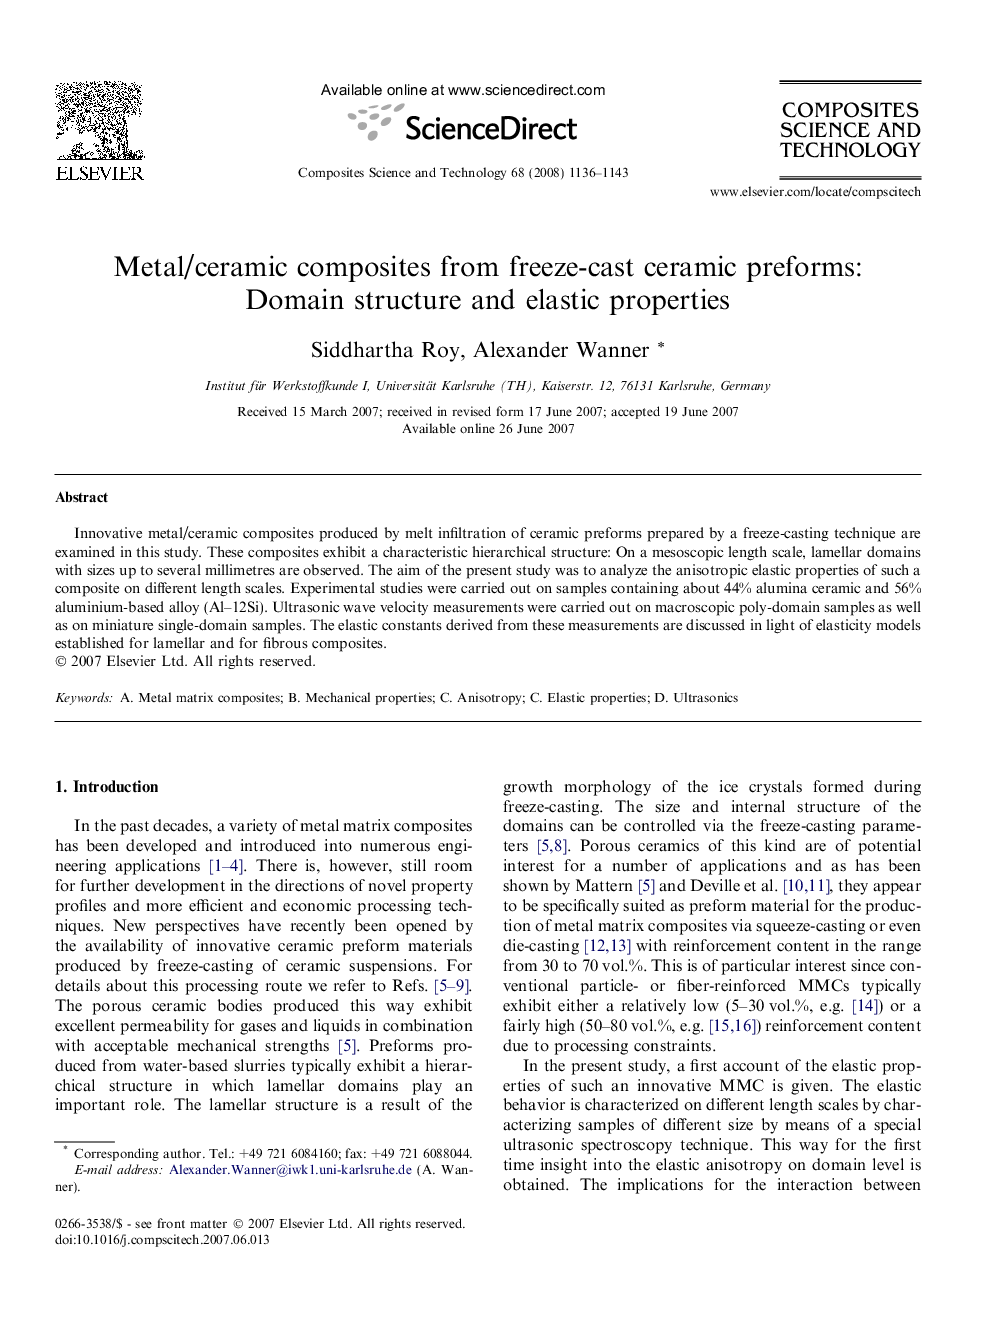 Metal/ceramic composites from freeze-cast ceramic preforms: Domain structure and elastic properties